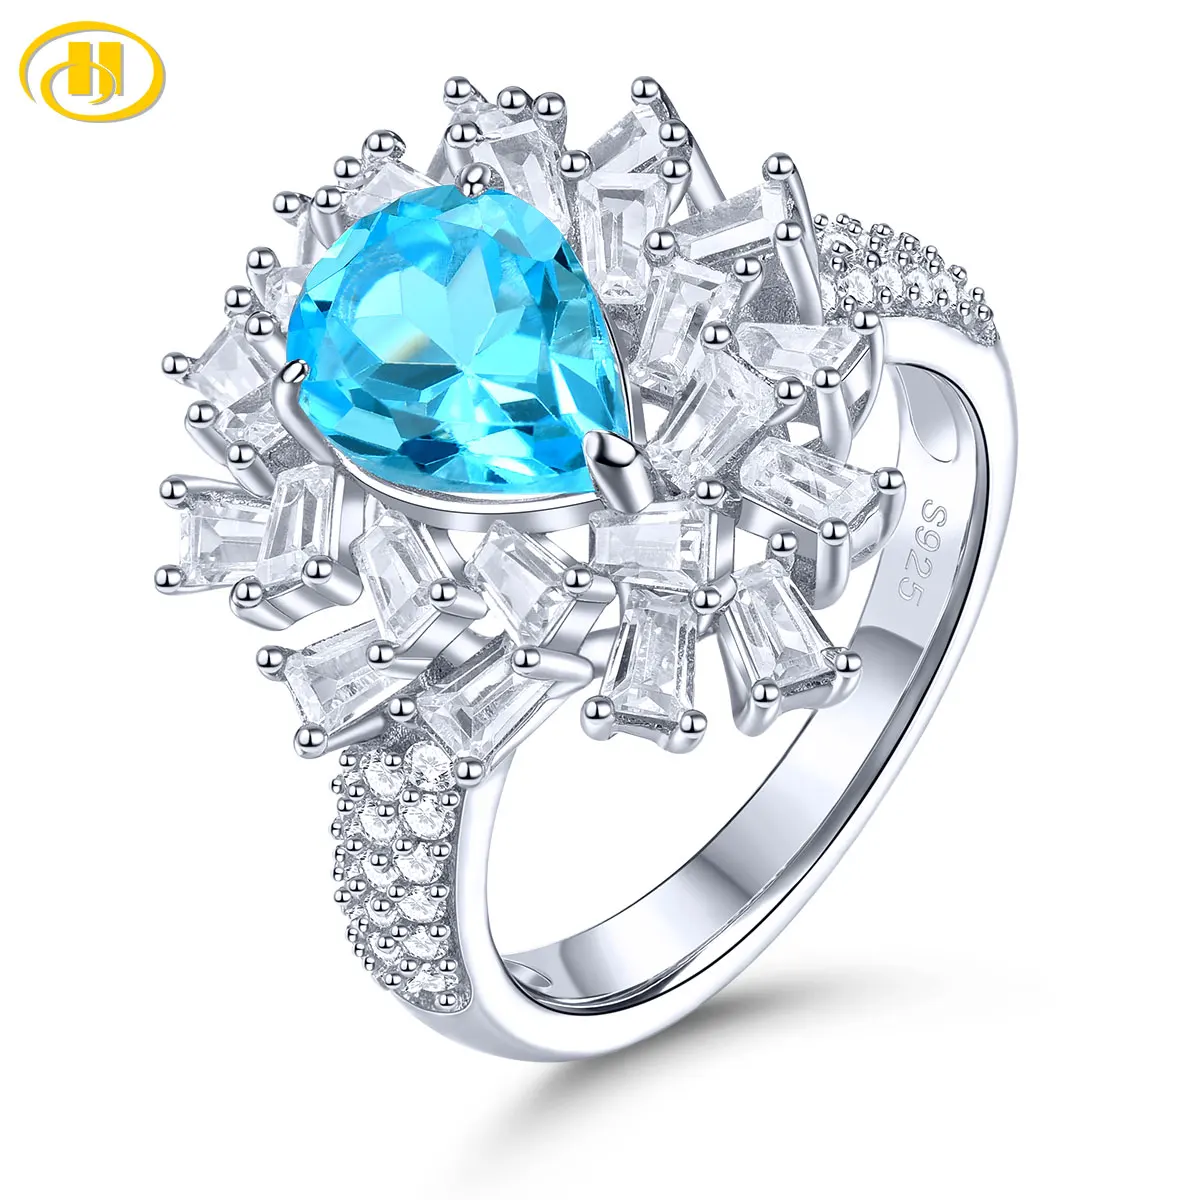 

Natural Blue Topaz Sterling Silver Rings 4.2 Carats Genuine Topaz Gemstone Special Original Jewelry Design S925 Women's Gifts